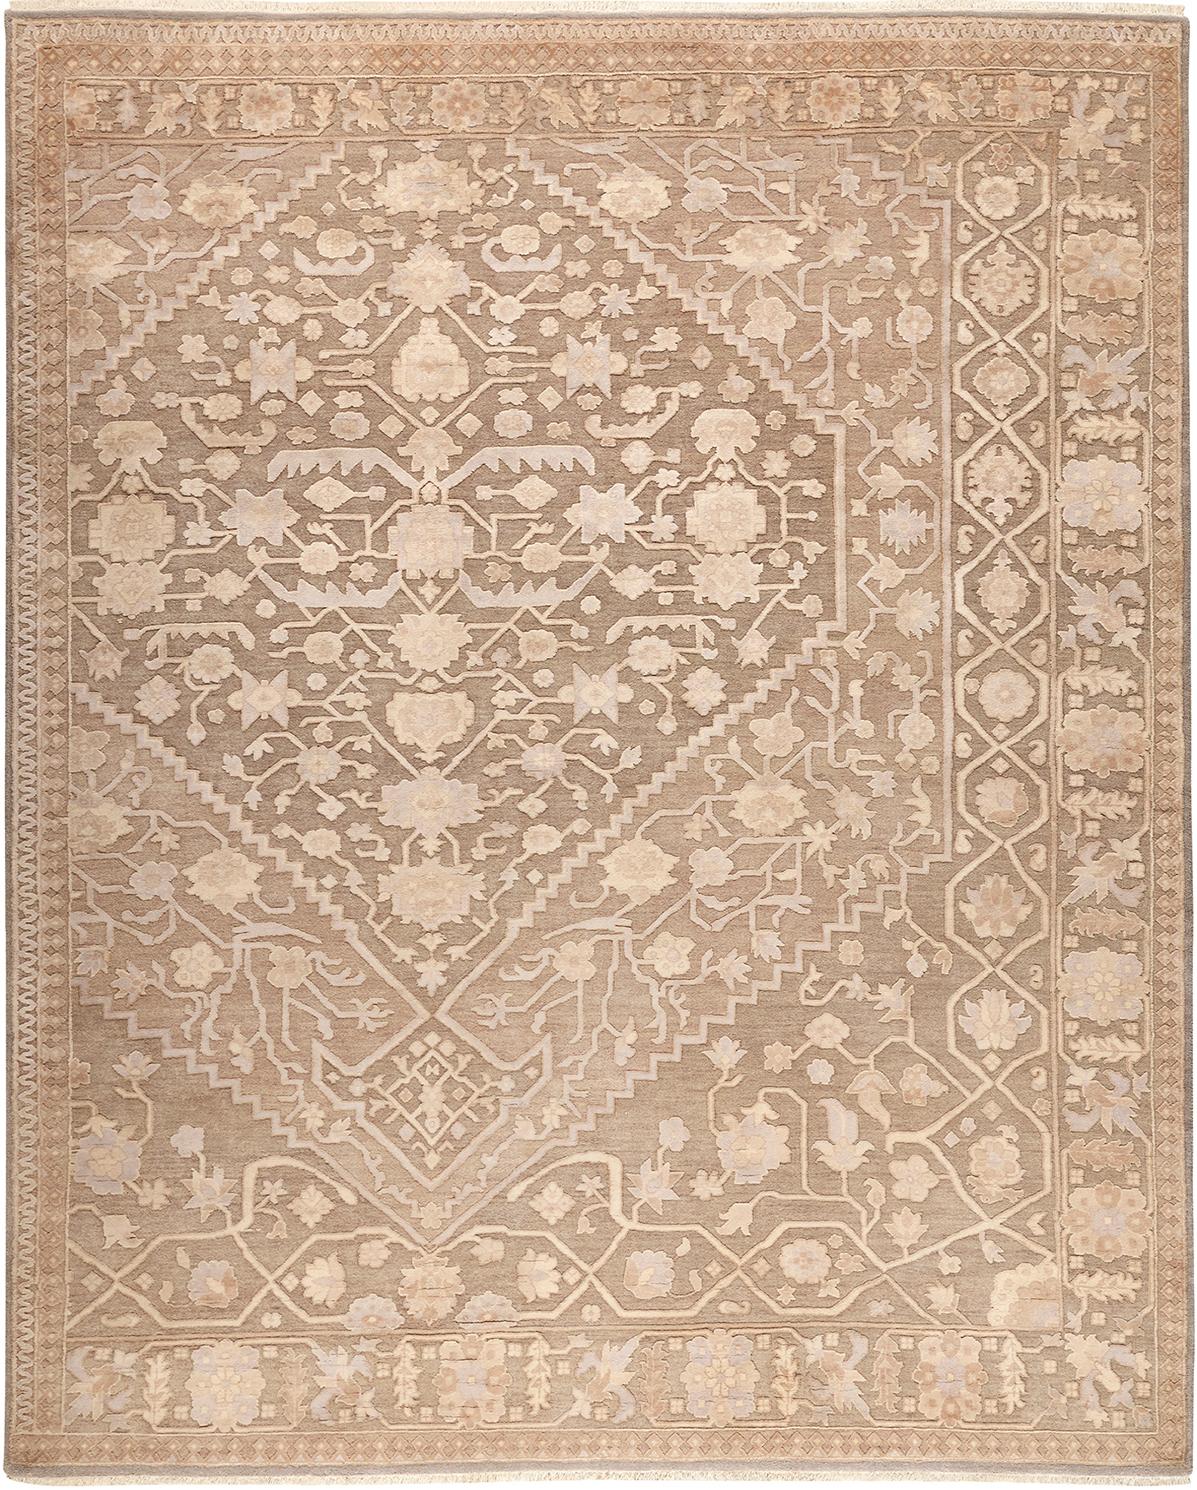 This antique Persian Bidjar is one of the rarest and most artistic rugs and features a distinct eye-catching design. The tribal geometric layout features a bold border, rich with floral designs as well as whimsical geometric figures of avian life